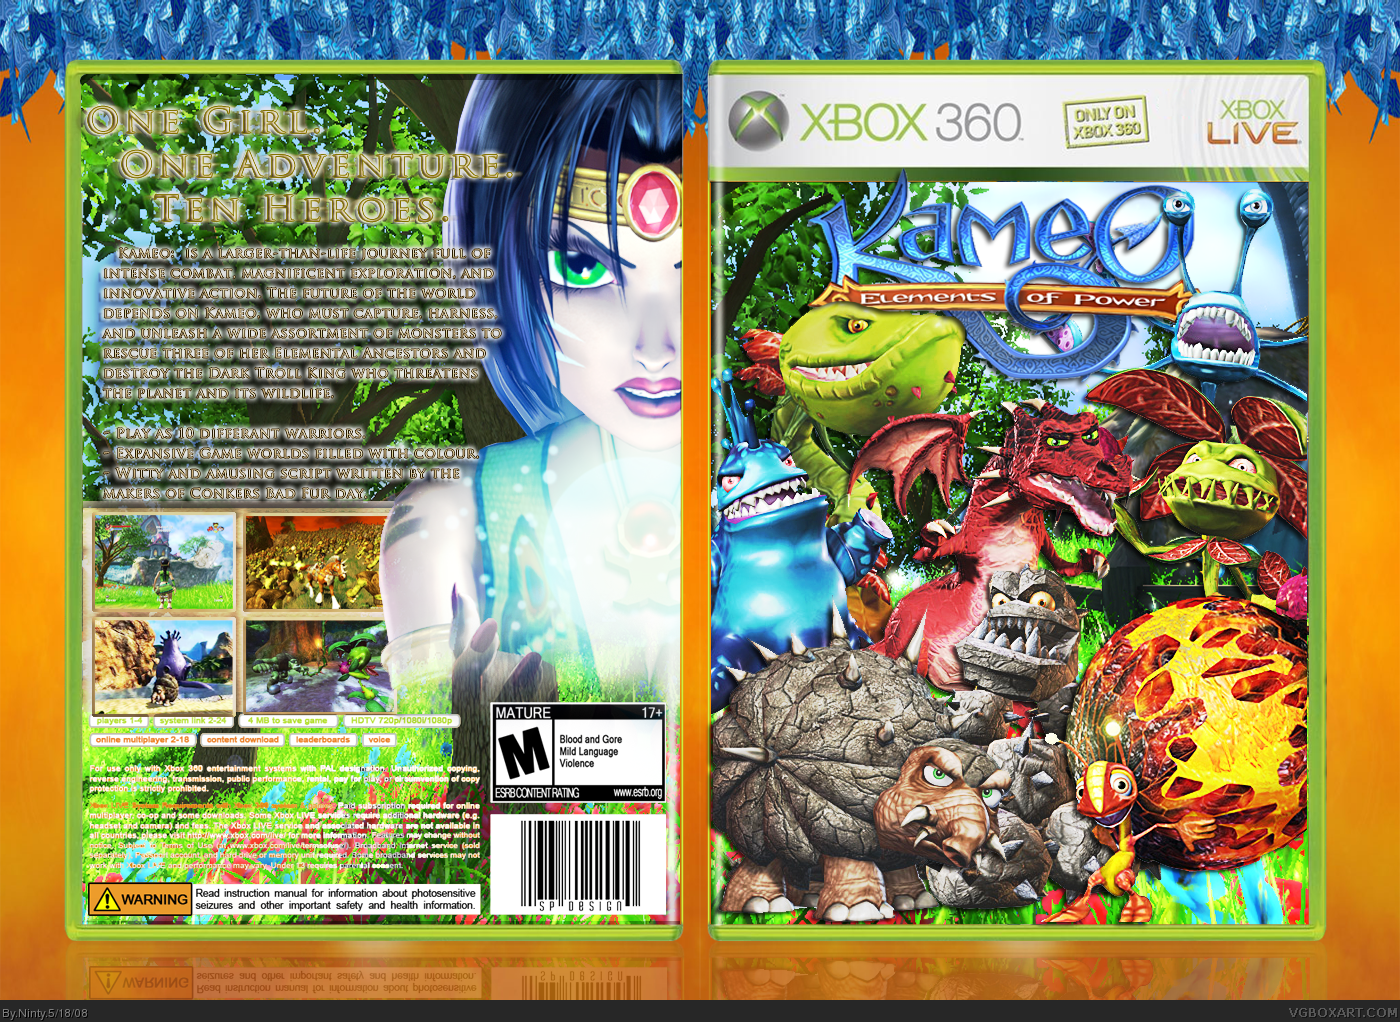 Kameo: Elements of Power box cover